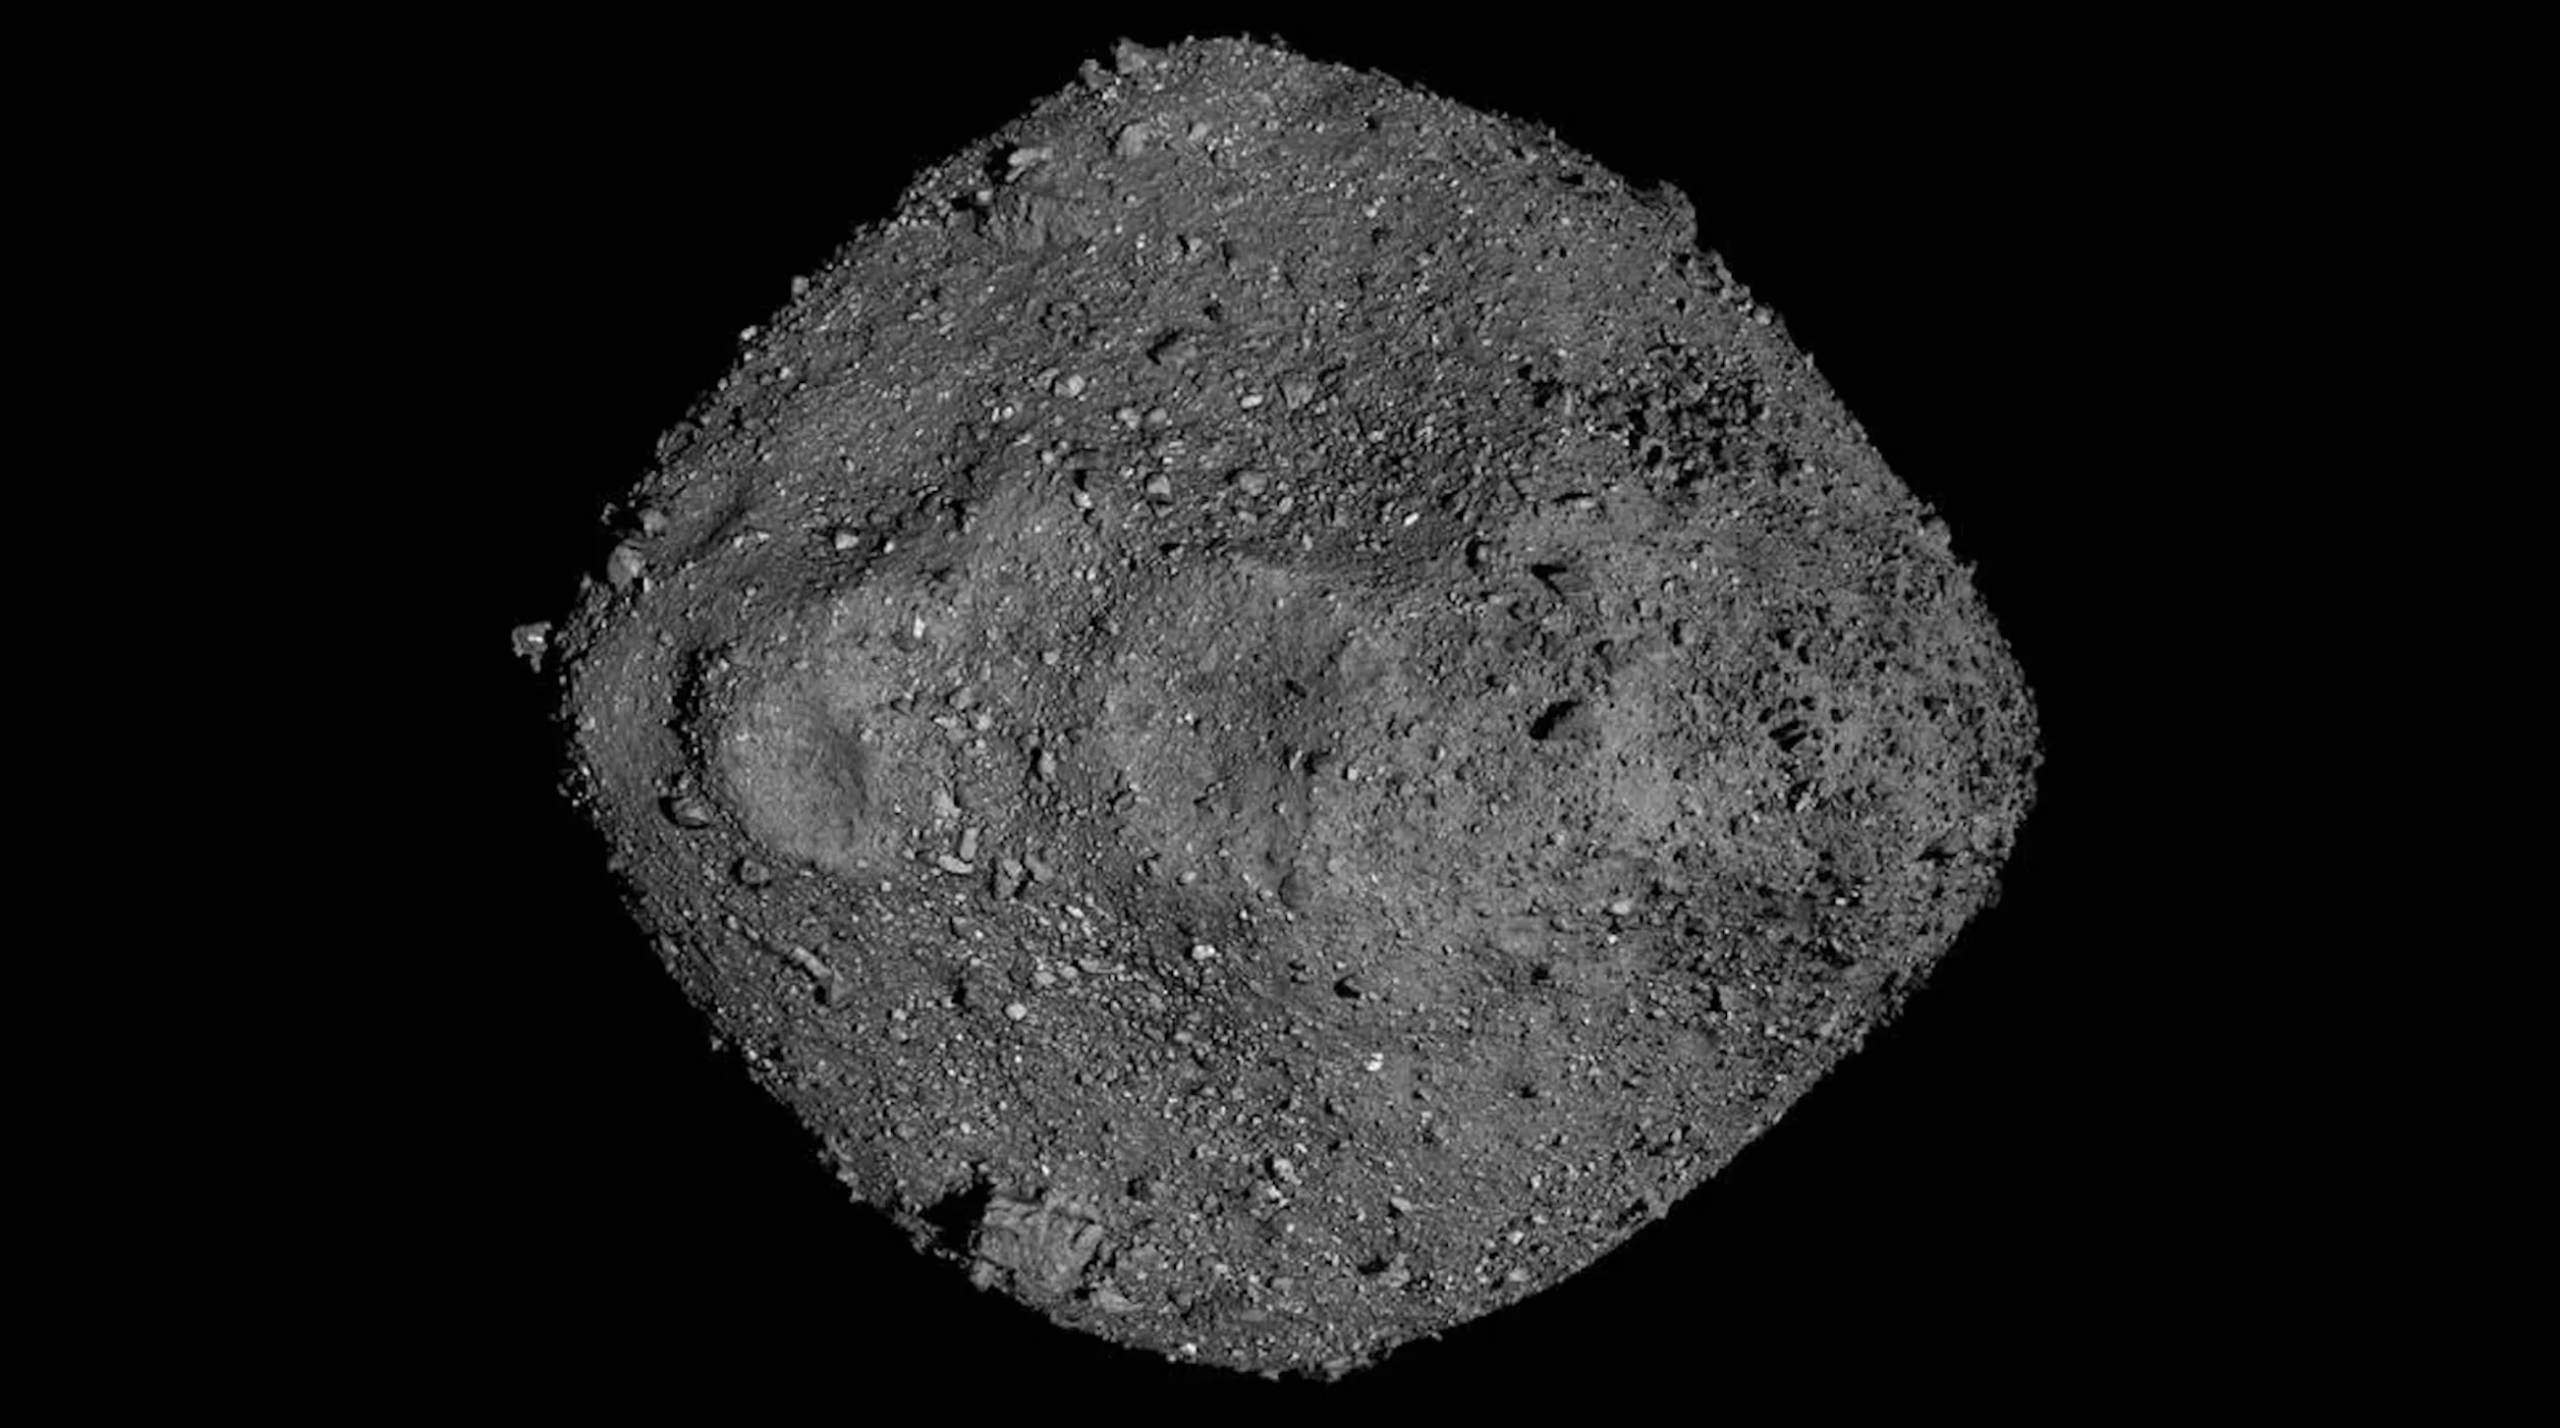 Asteroid now most surveyed in solar system, thanks to a Canadian laser instrument